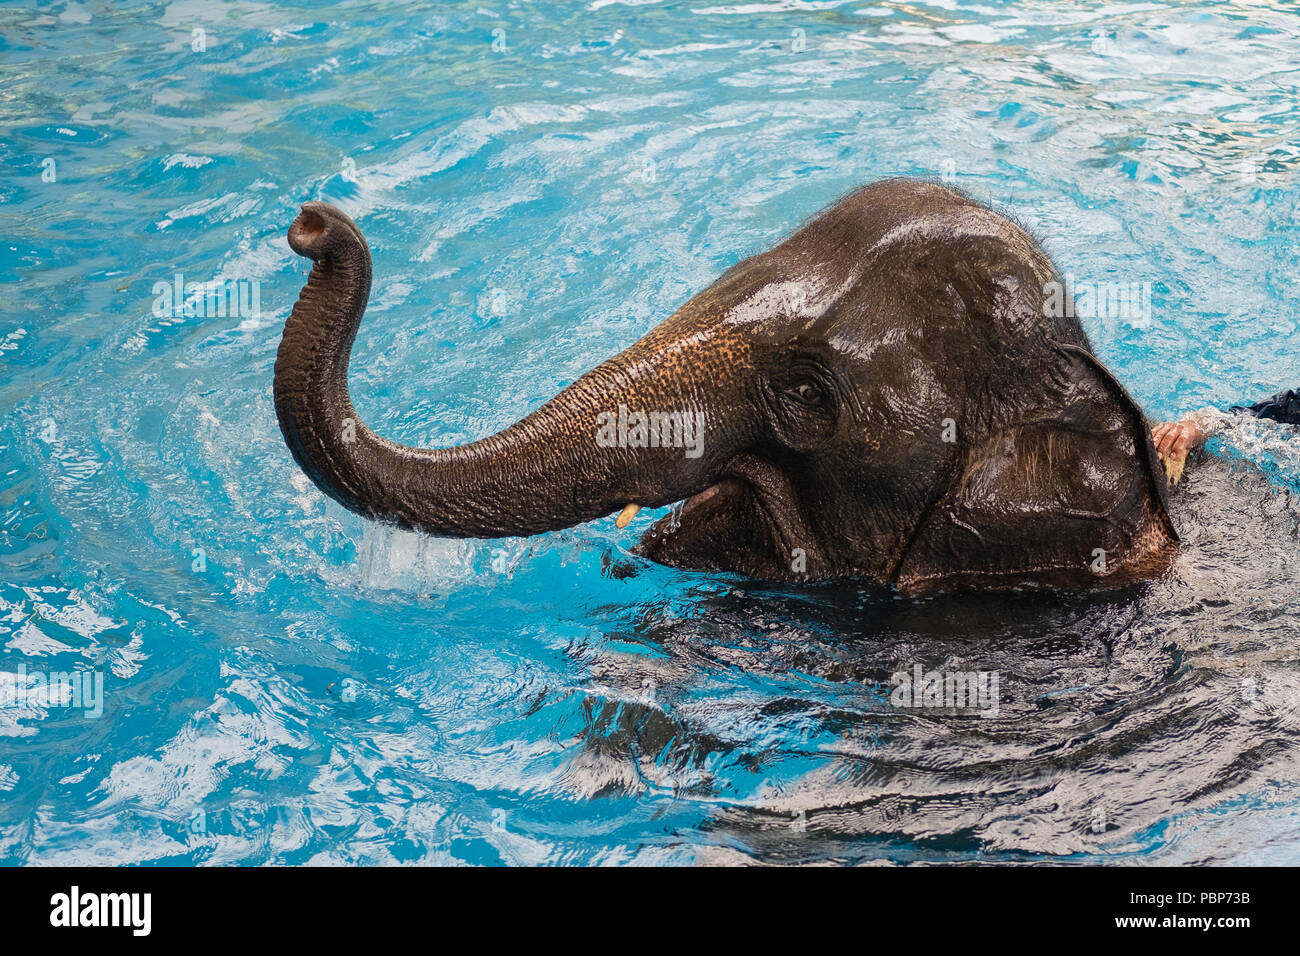 baby elephant playing in water Stock Photo